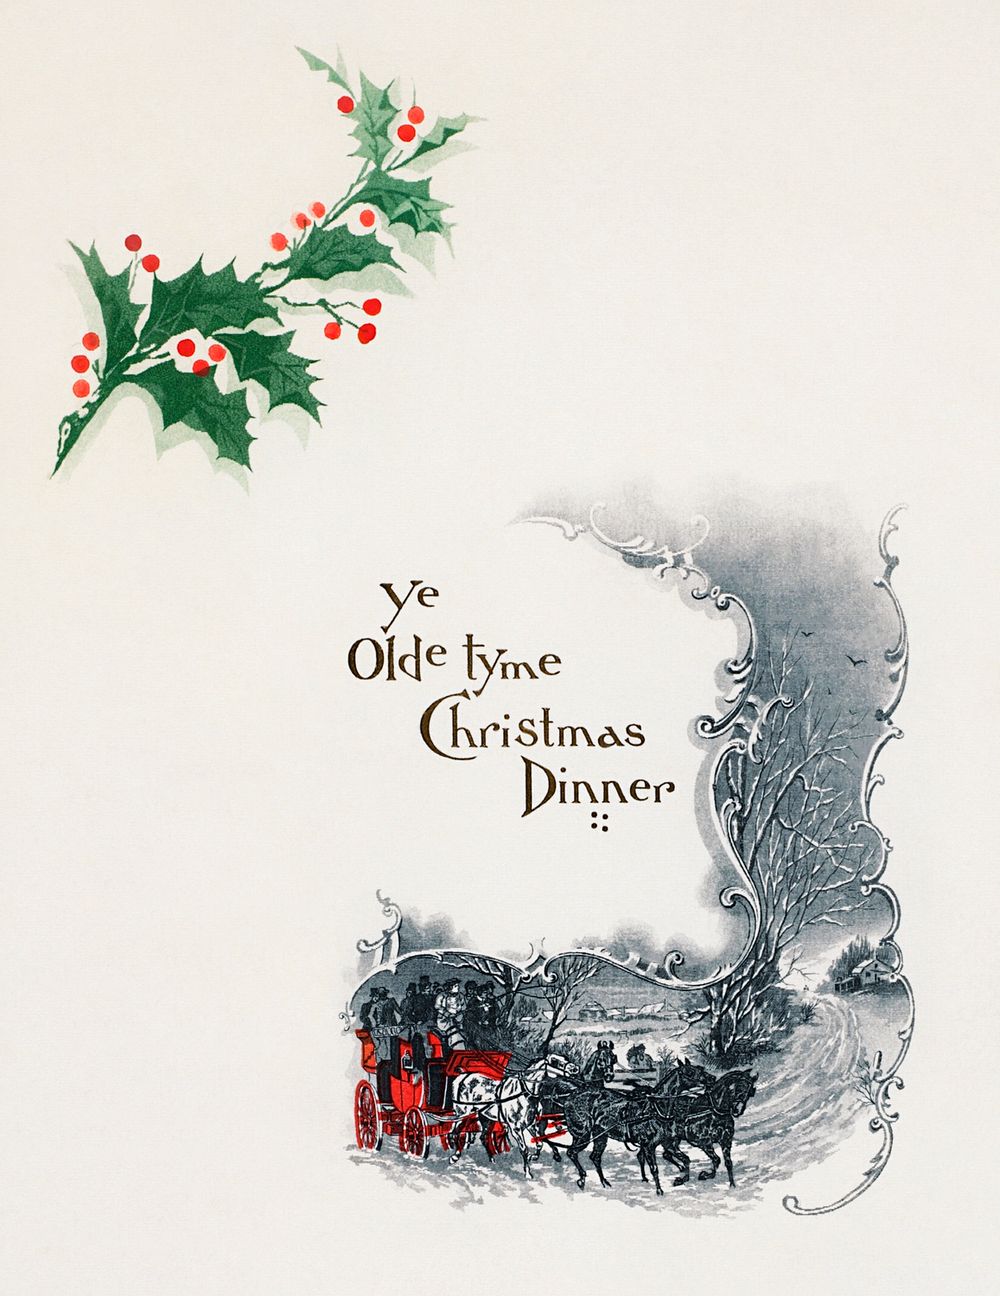 Christmas menu featuring a horse carriage from a Christmas dinner held by Logan house at Altoona, PA from (1898) The…